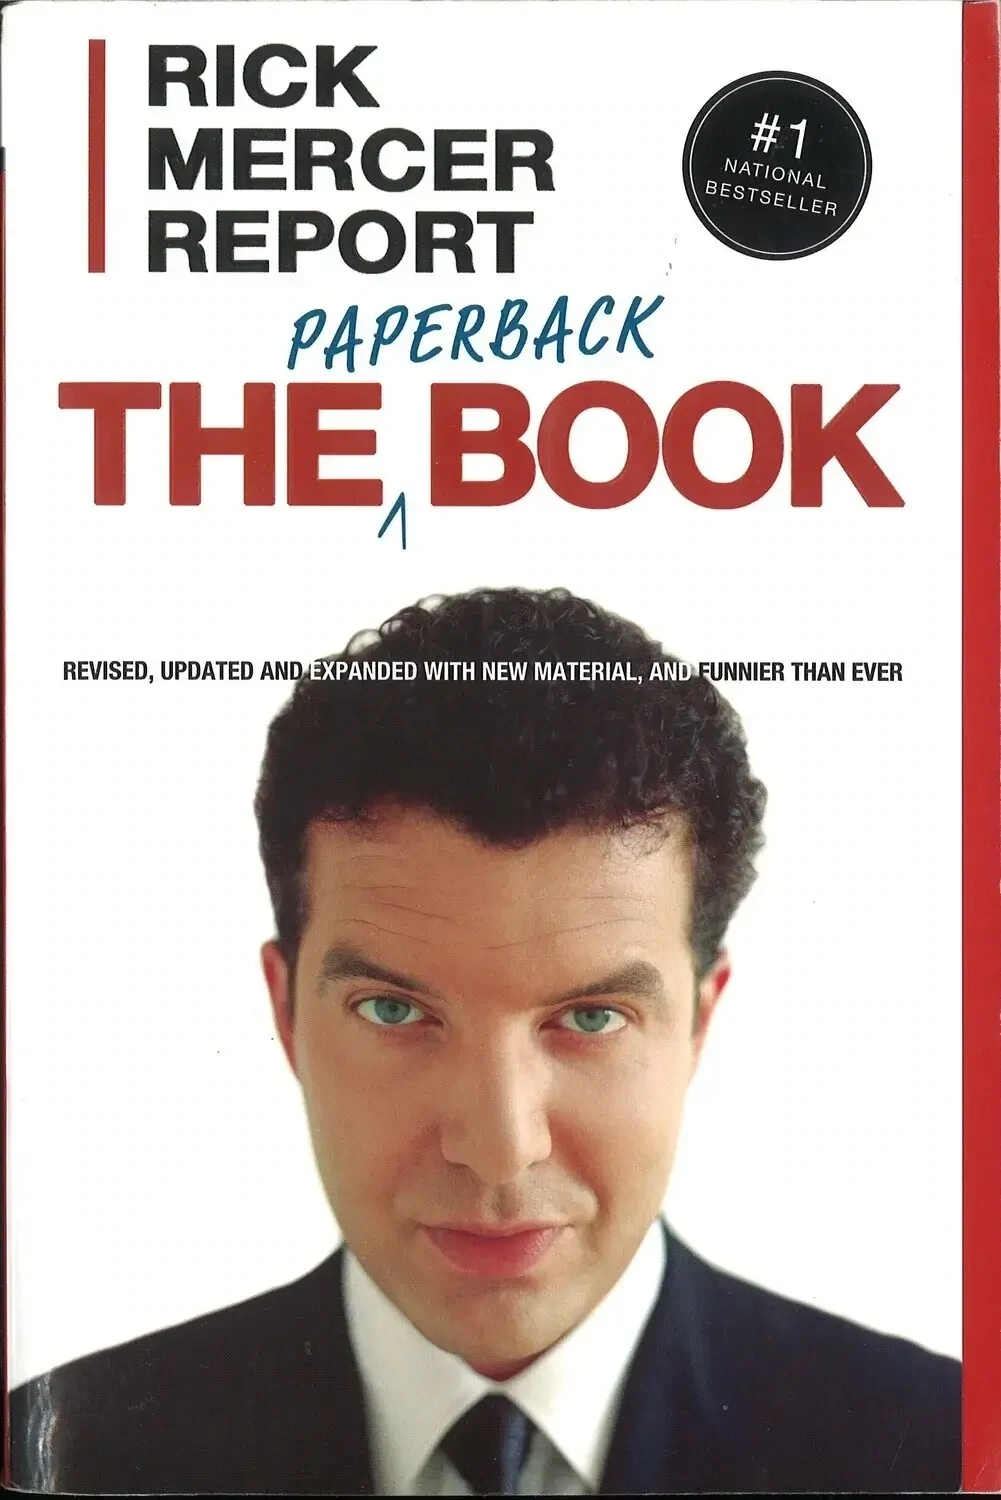 The Rick Mercer Report: The Paperback Book